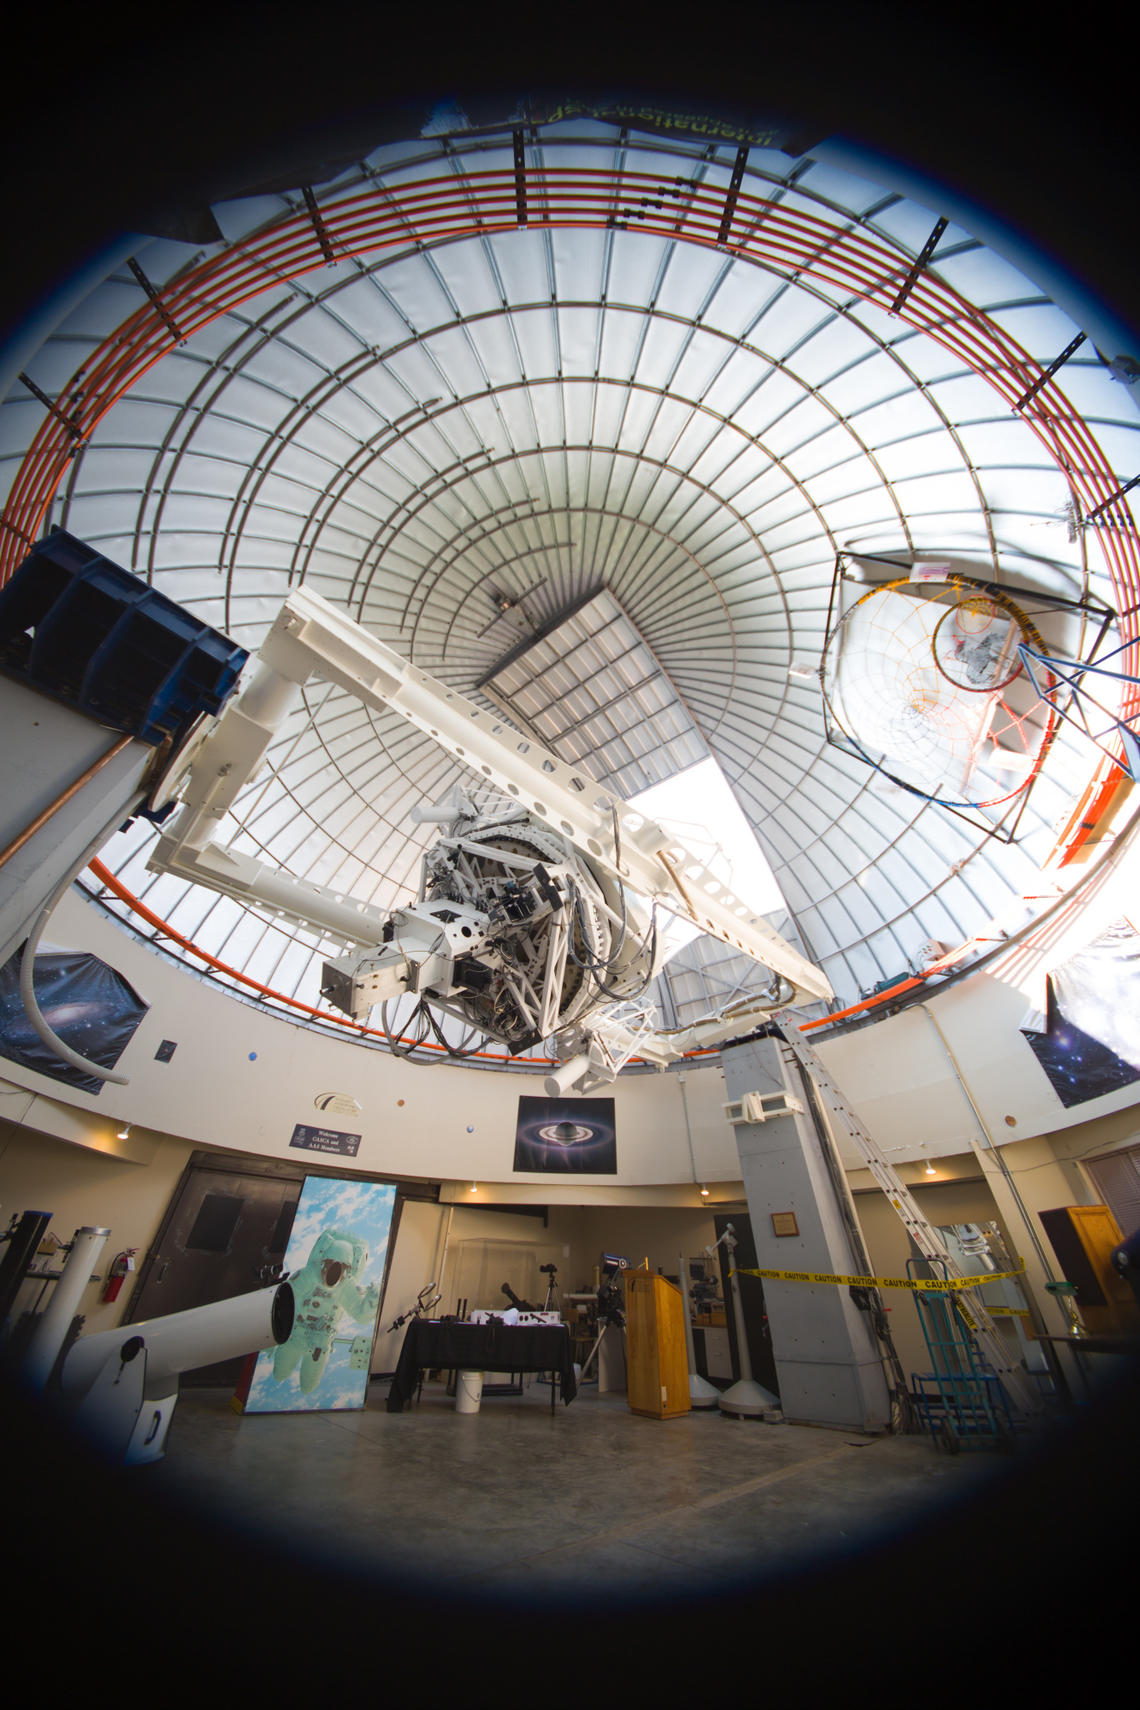 There is a special daytime program at the Rothney Astrophysical Observatory on July 20 to celebrate the 50th anniversary of the lunar landing. Registration is required for this event. 